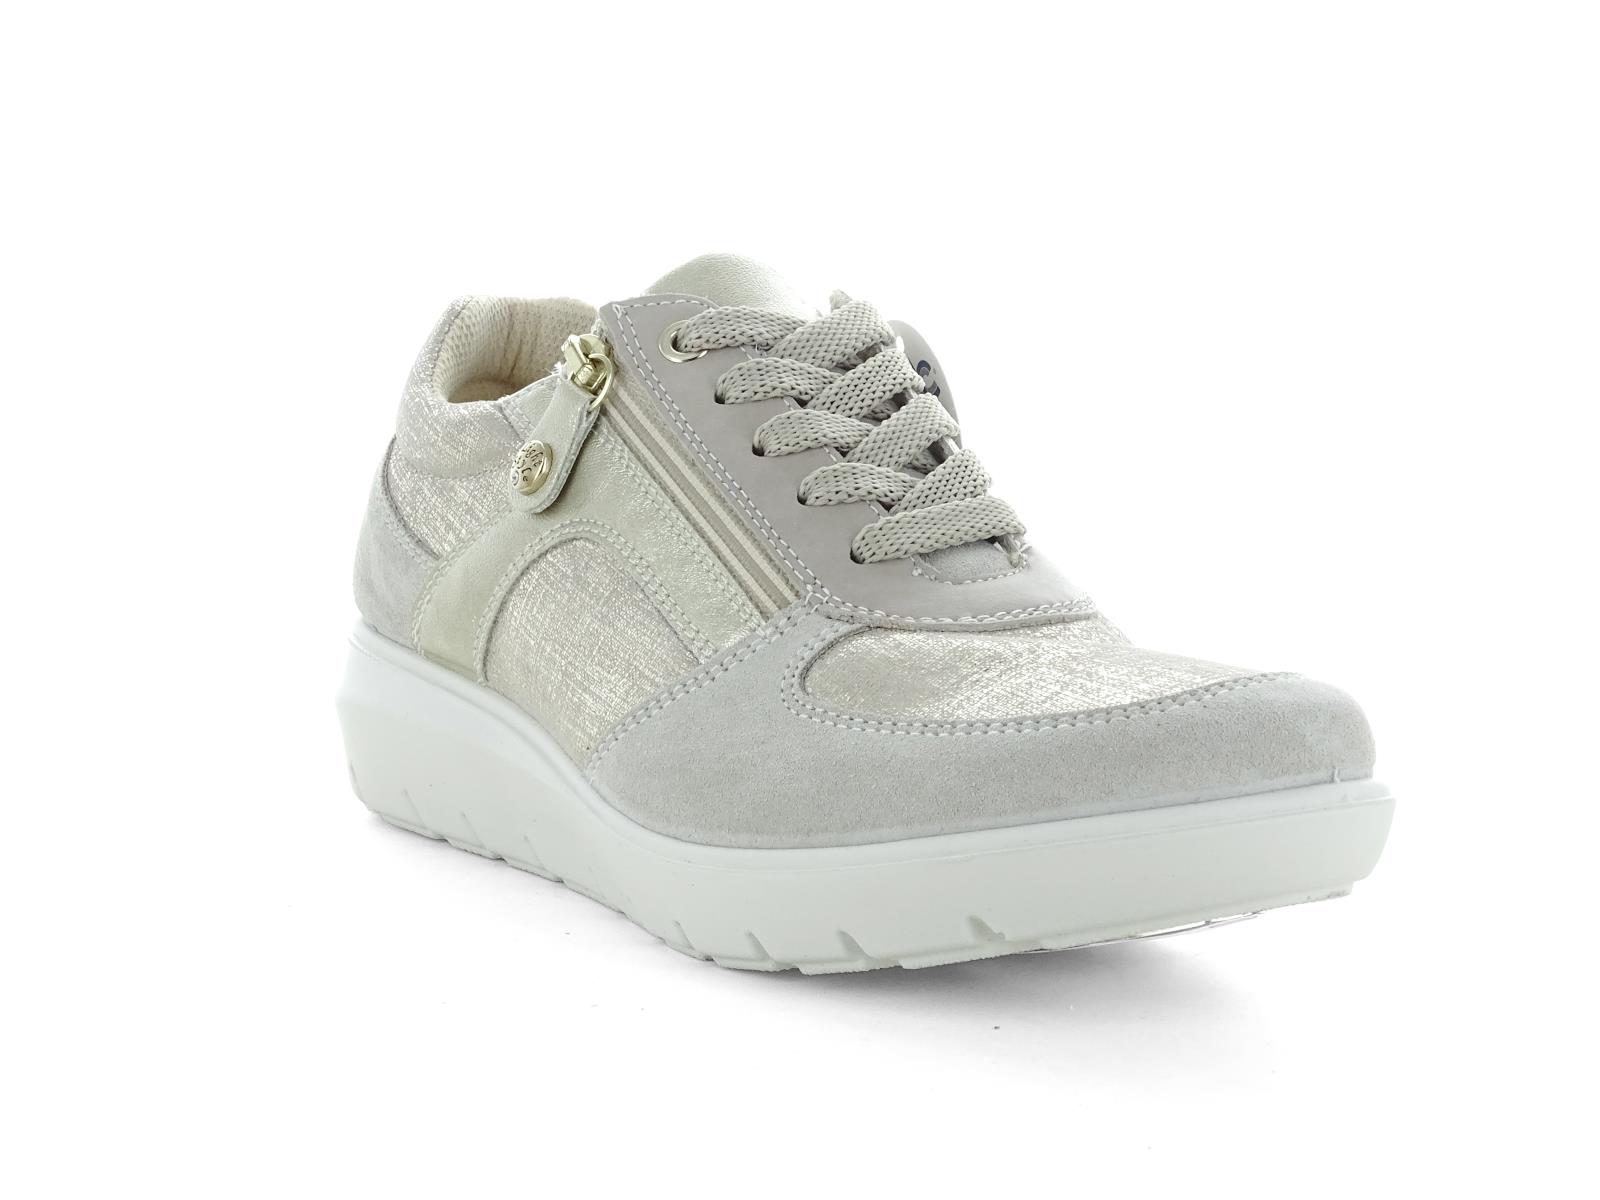 IMAC 556180 SNEAKERS DONNA